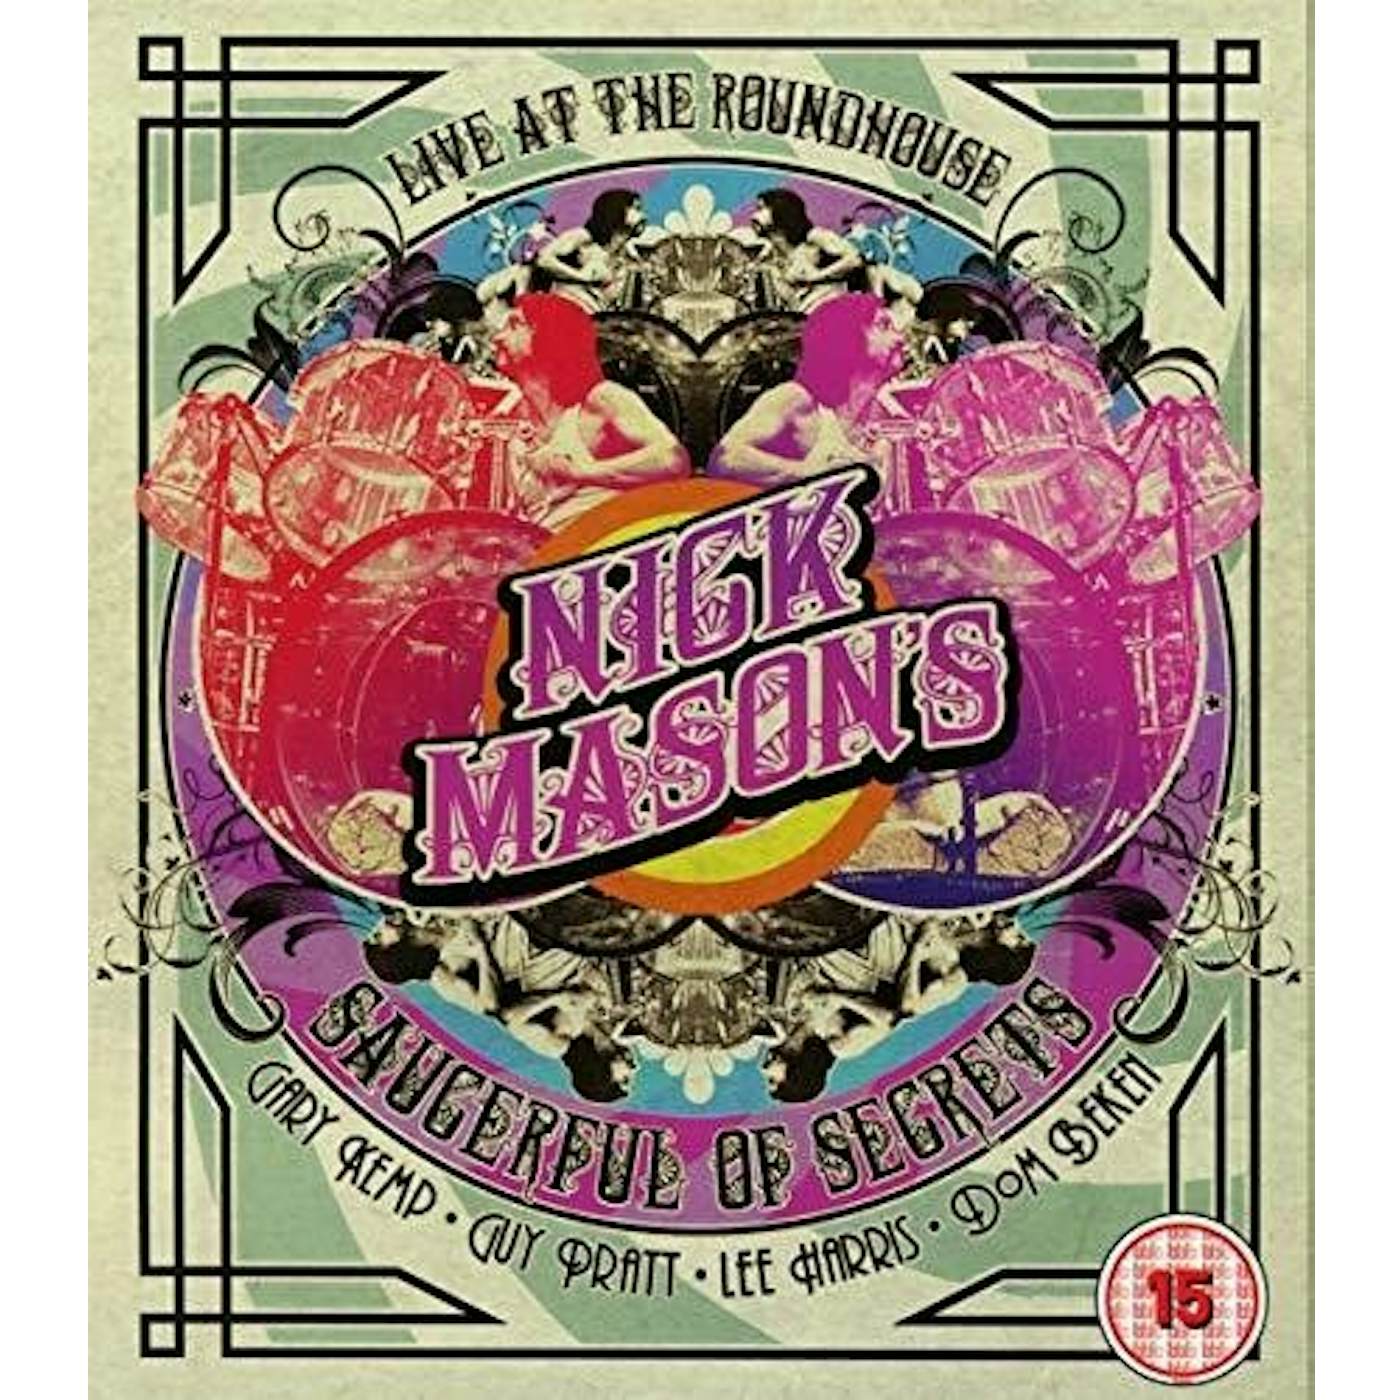 Nick Mason's Saucerful of Secrets Live at the Roundhouse Baseball